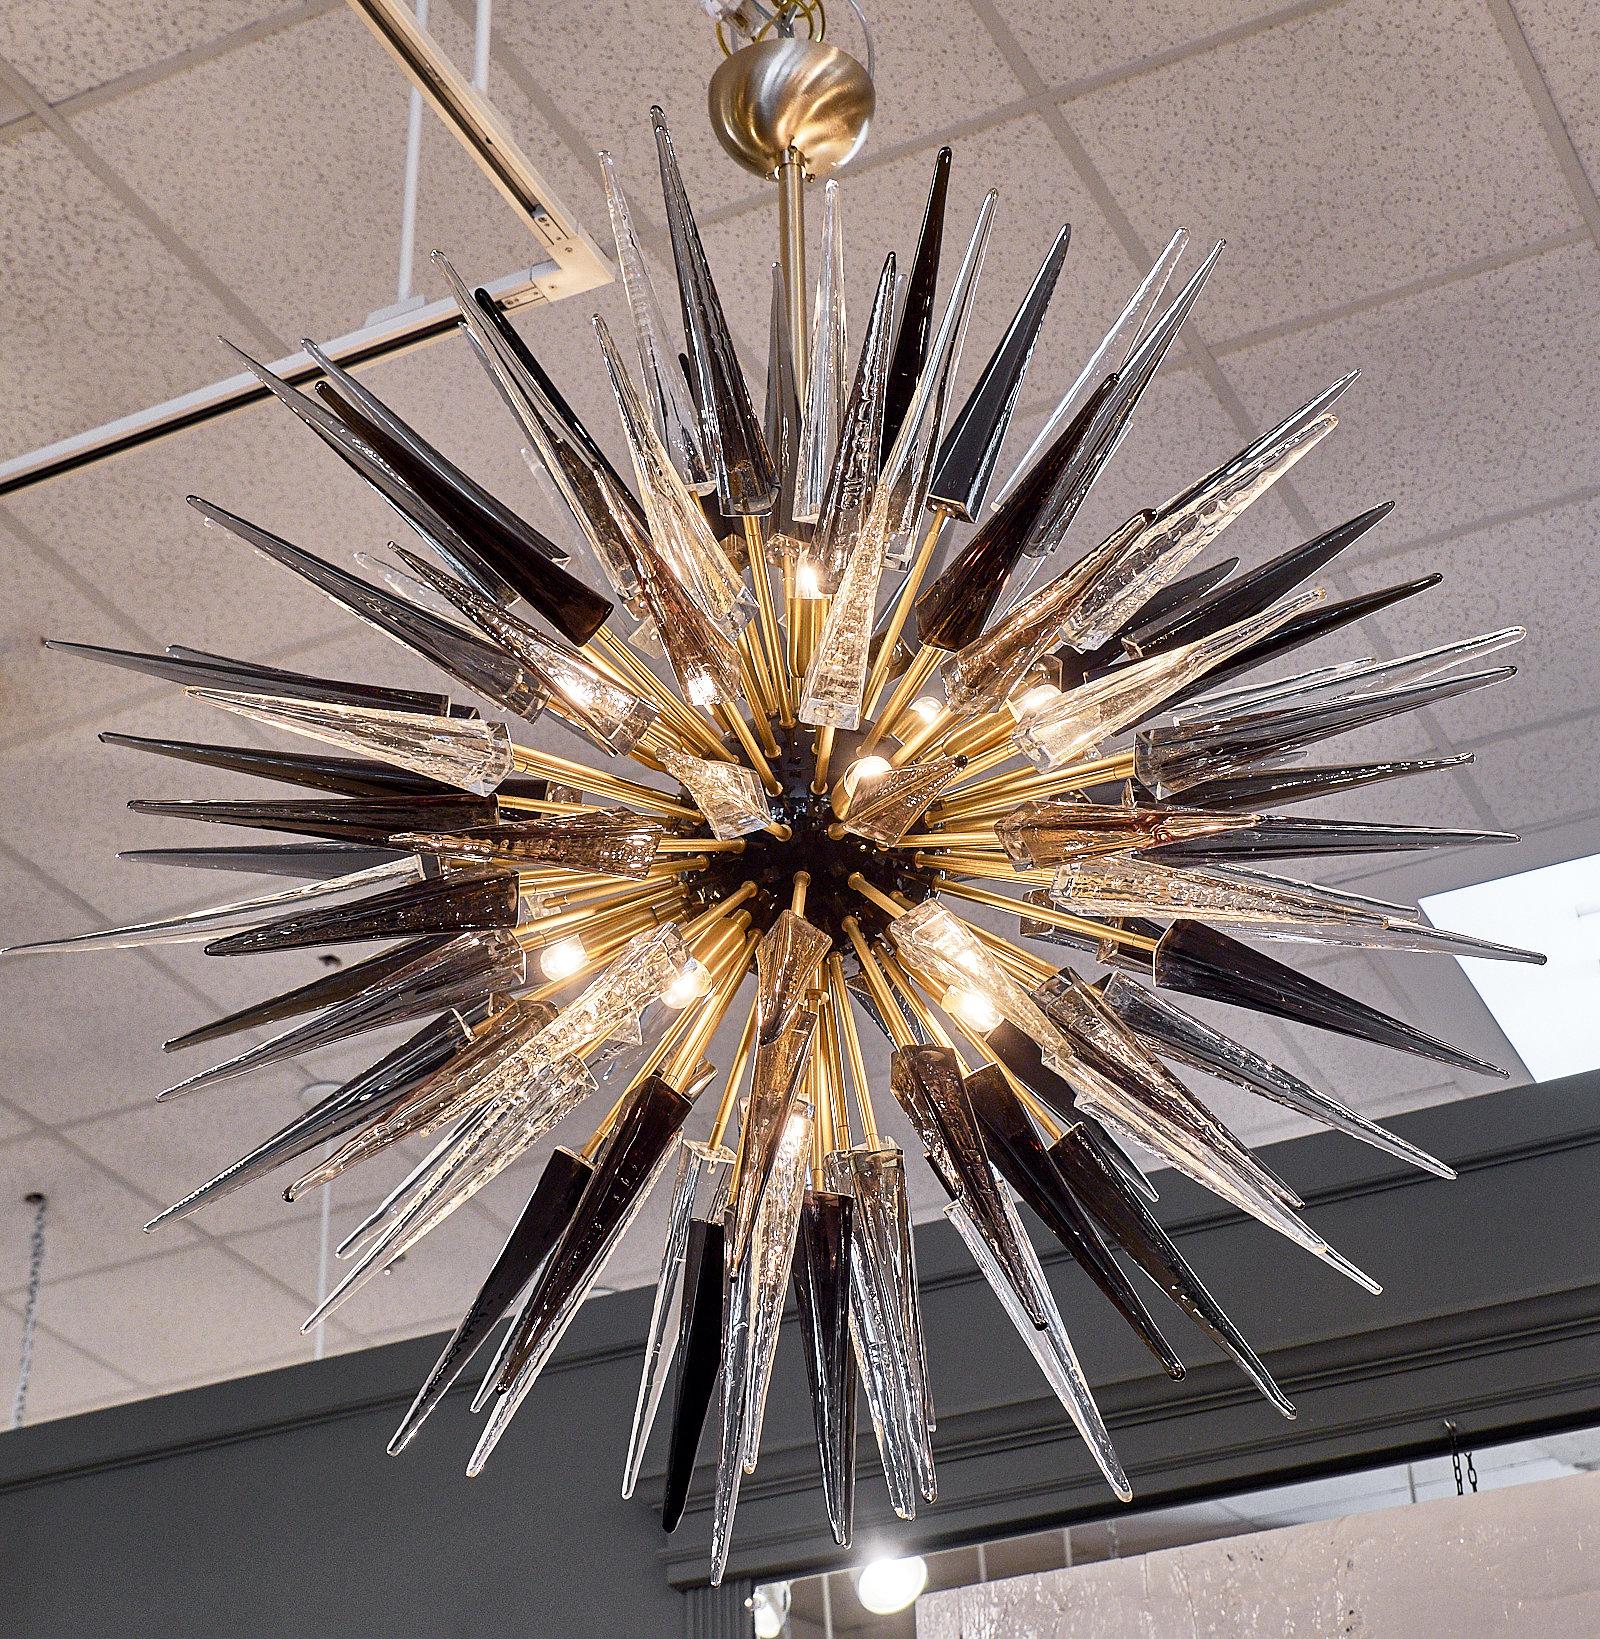 Italian Murano glass Sputnik prism chandelier. This fixture features many handblown textured prisms of various colors (black, gray, clear) mounted on a gilt brass structure. This spectacular chandelier has a stunning decorative impact! It has been